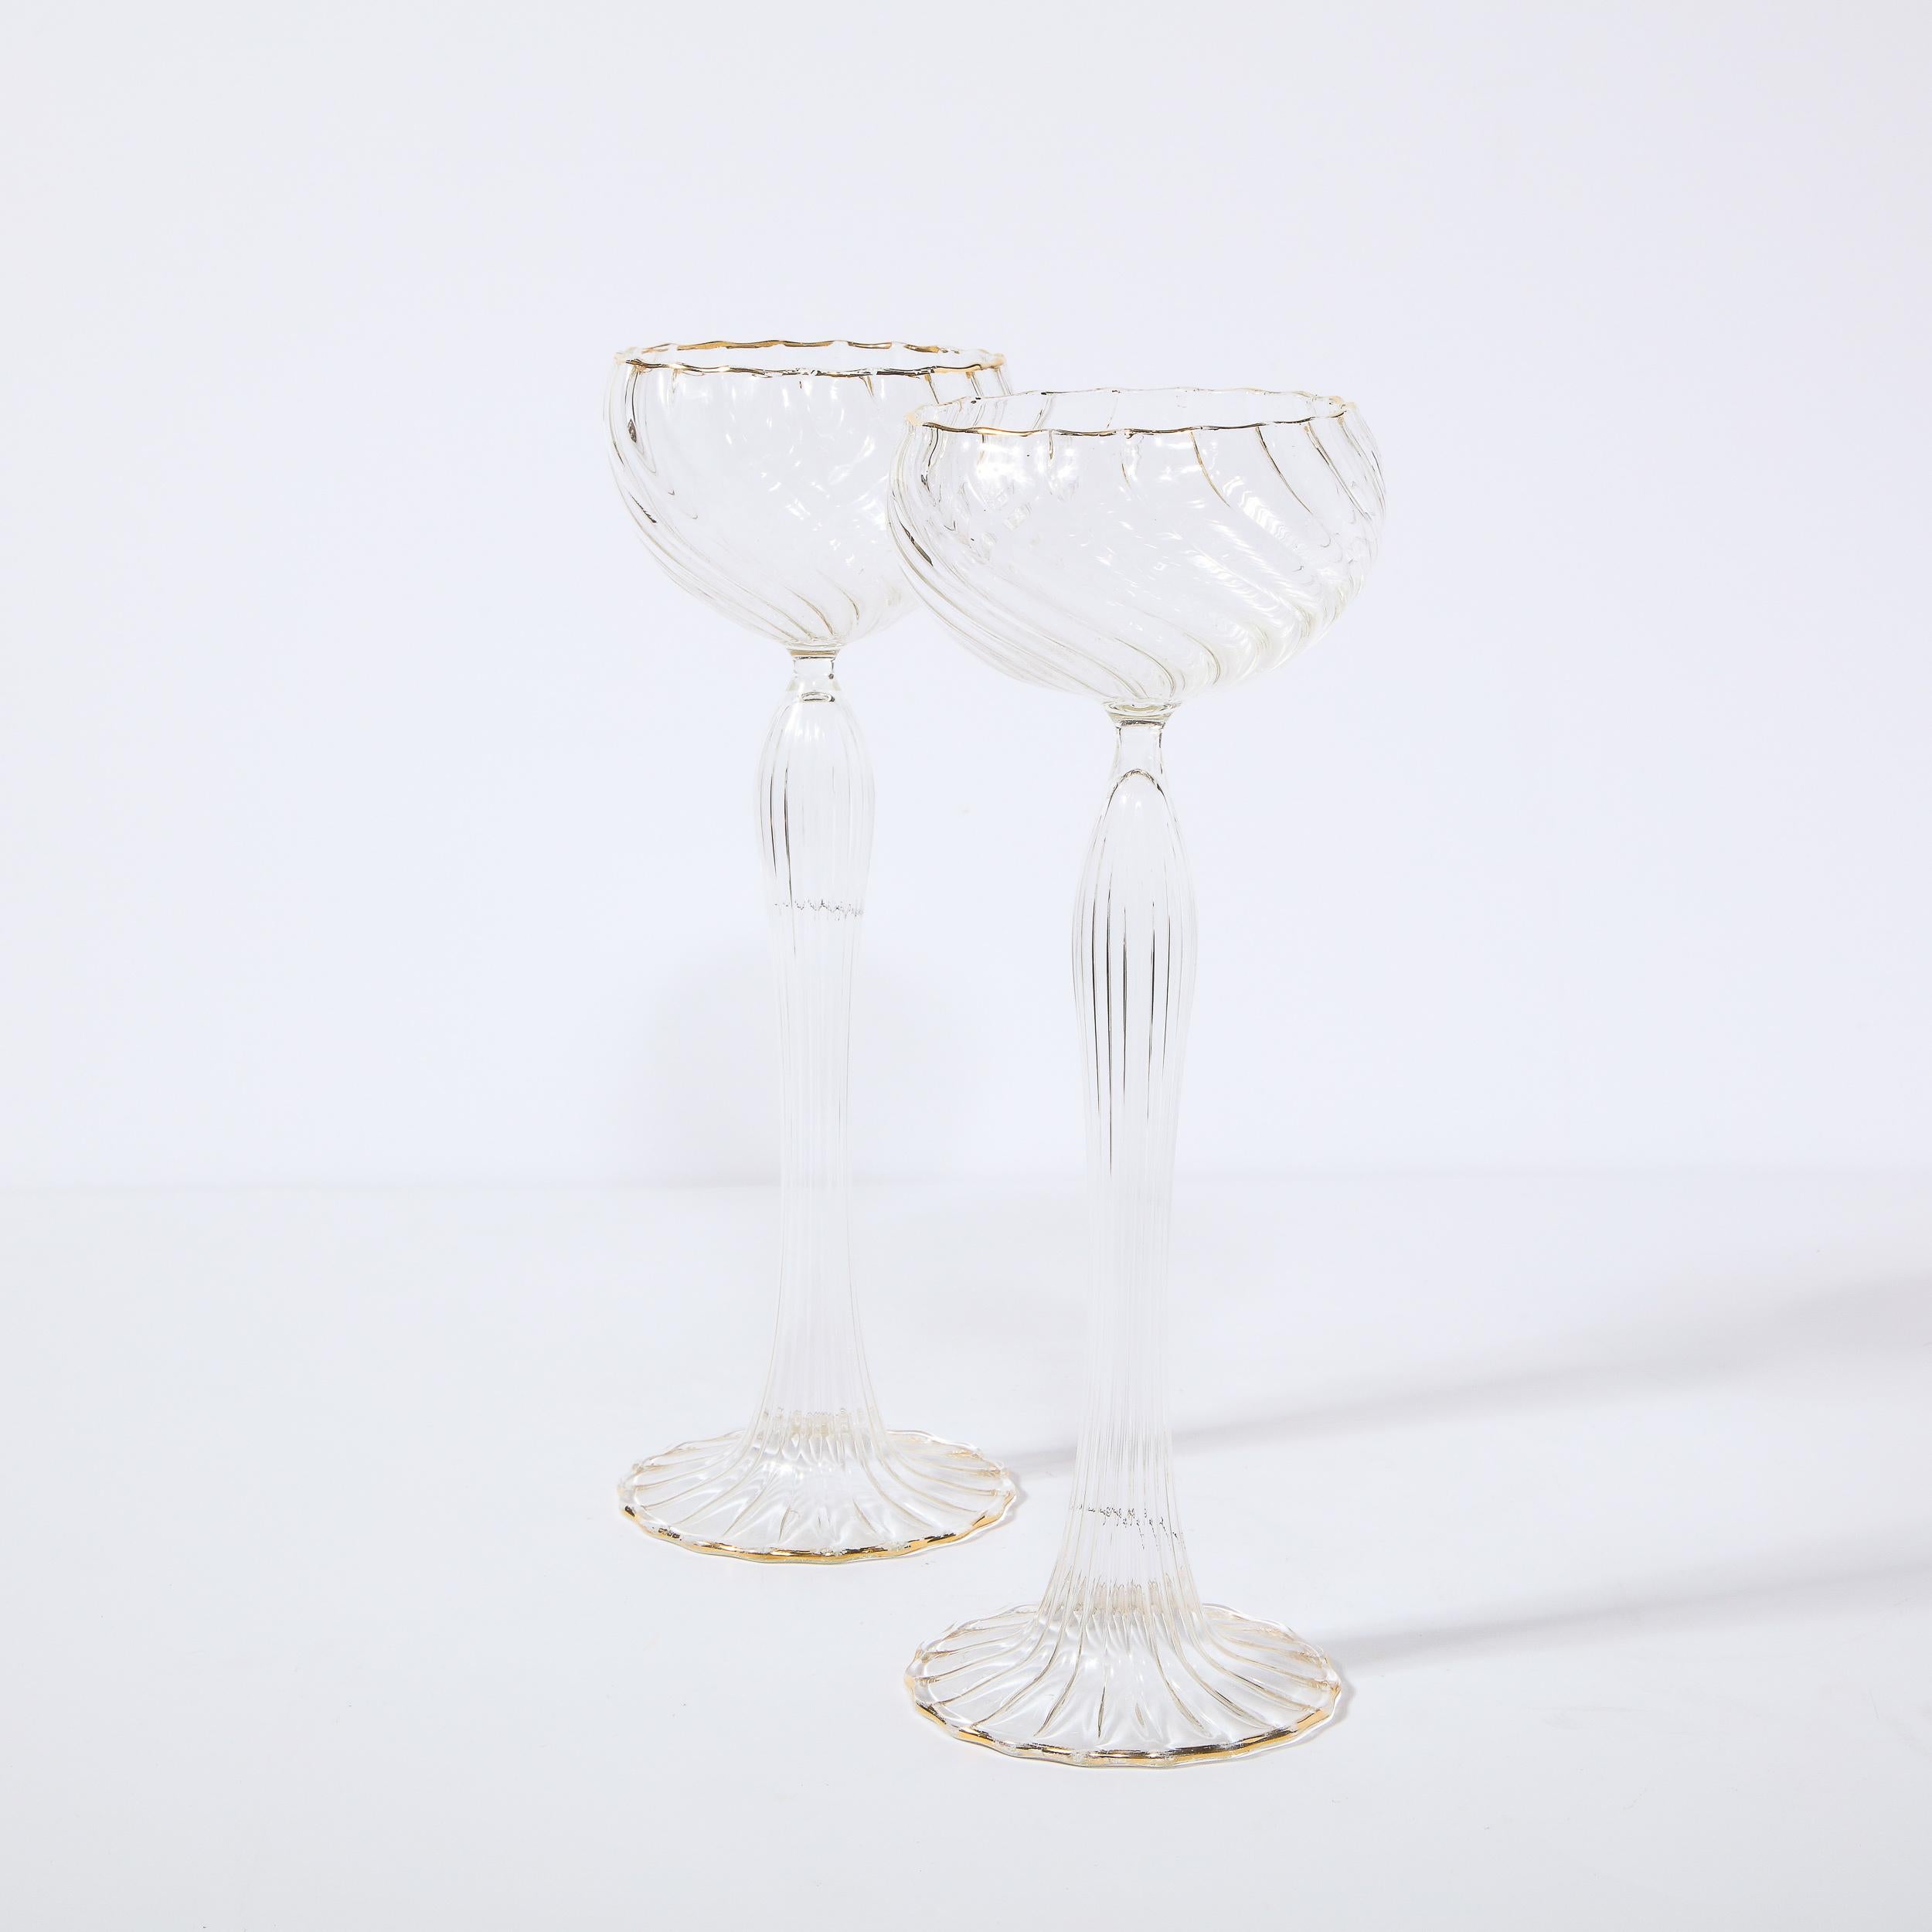 20th Century Pair of Signed Renata Gandini Modernist Clear Glass & 24kt Gold Candlesticks For Sale